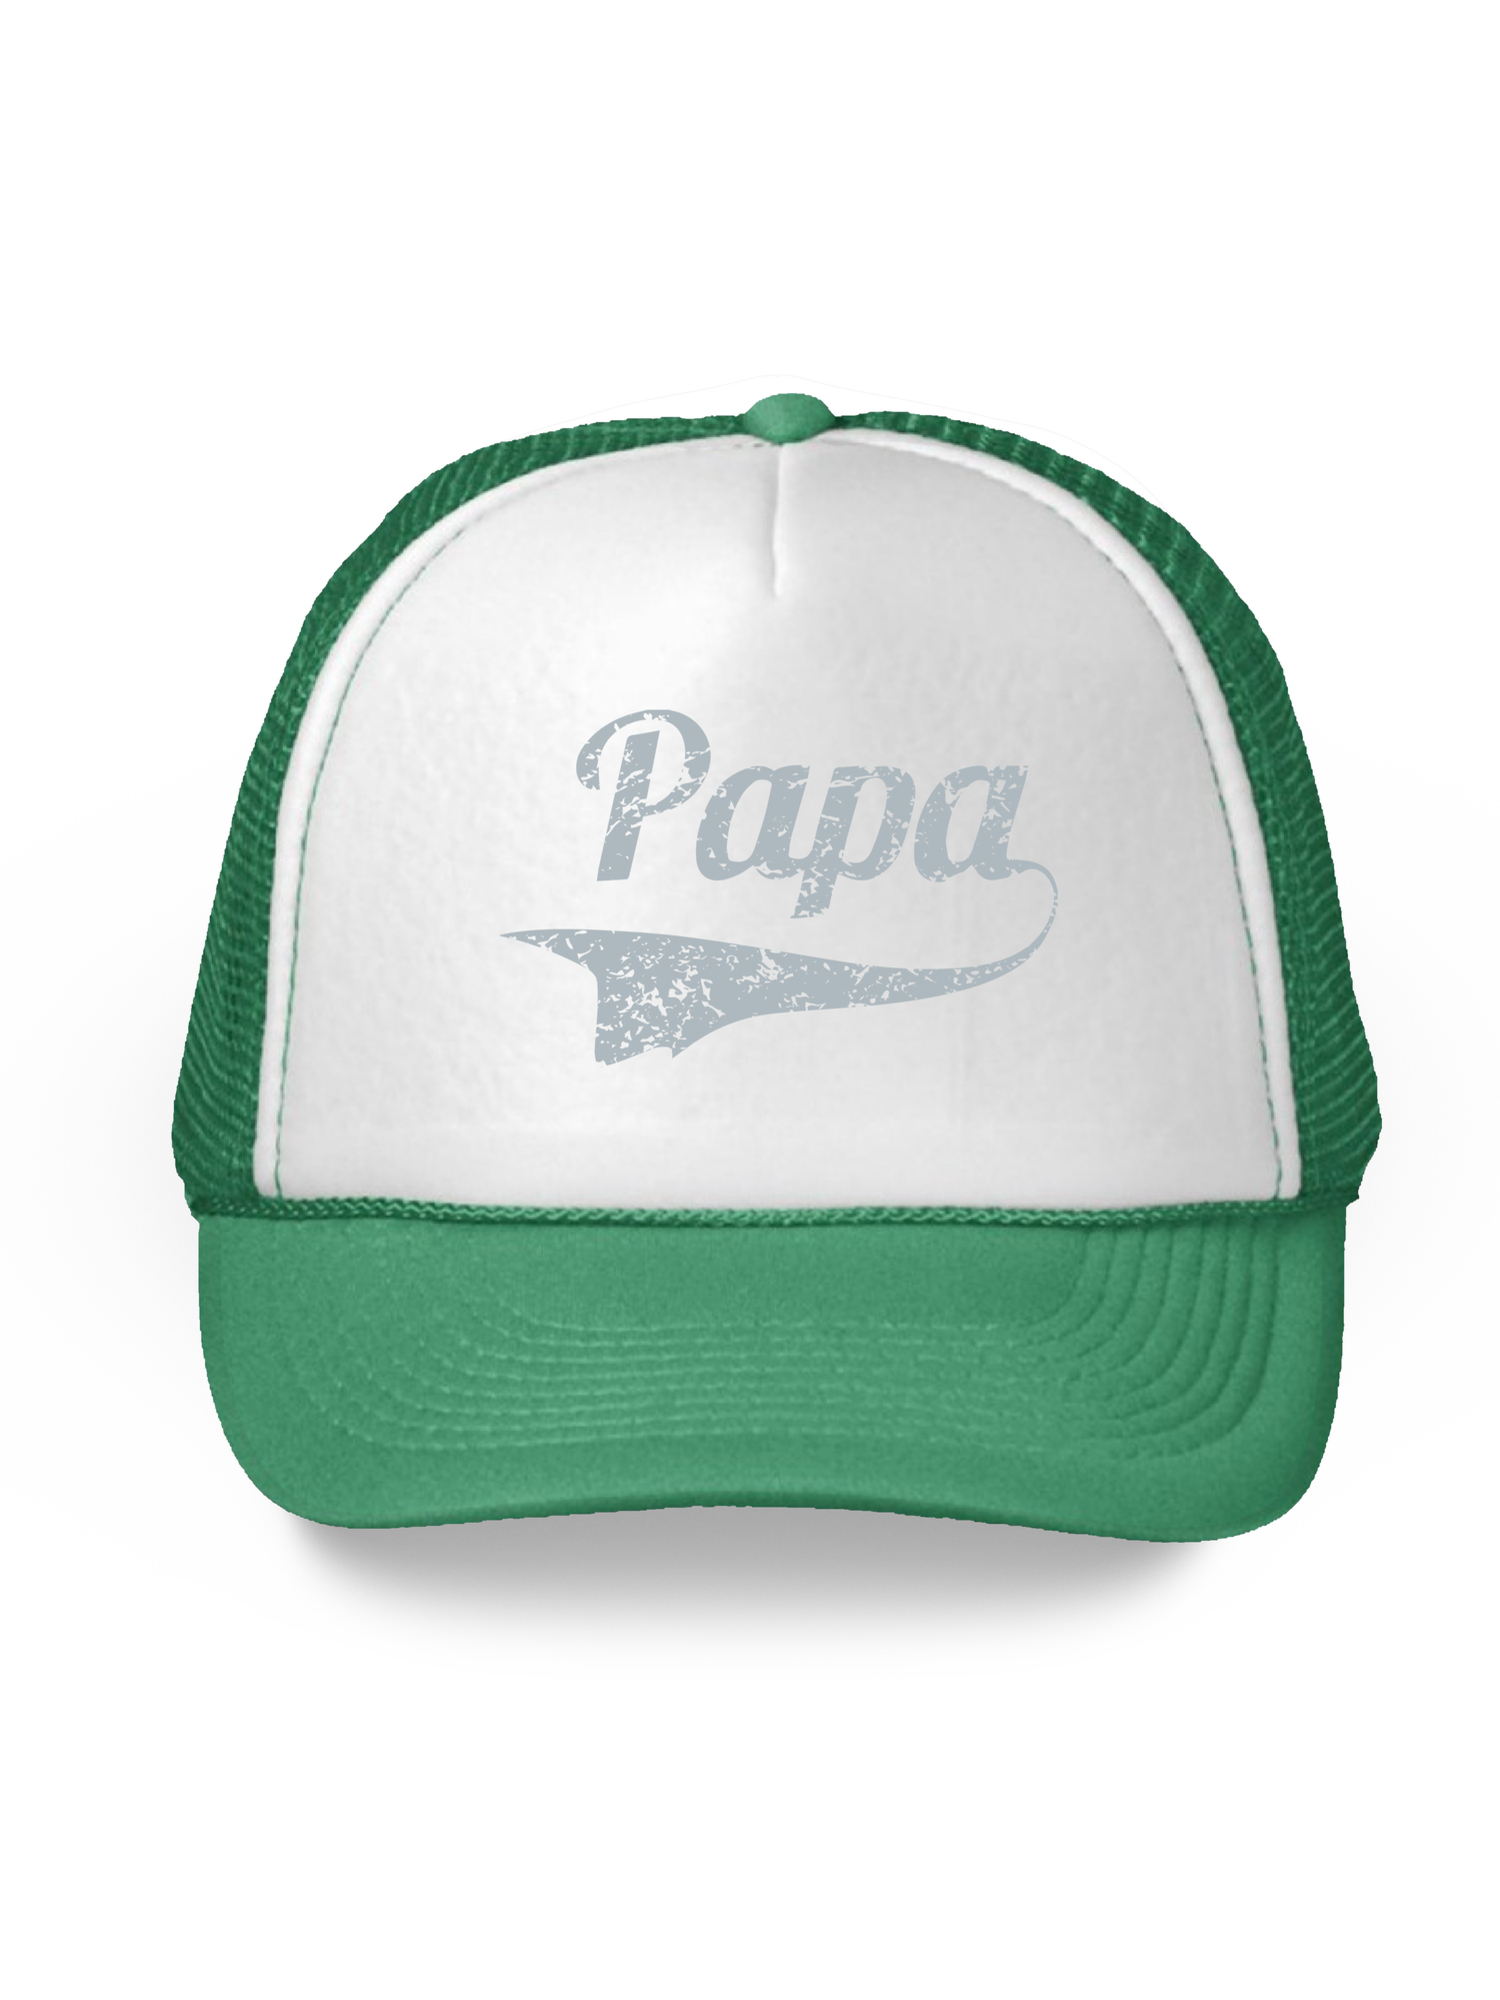 Awkward Styles Gifts for Dad Papa Trucker Hat Father's Day Gifts for Men Dad Hats Dad 2018 Trucker Hat Funny Gifts for Dad Hat Accessories for Men Father Trucker Hat Daddy 2018 Snapback Hat Dad Hats - image 1 of 6